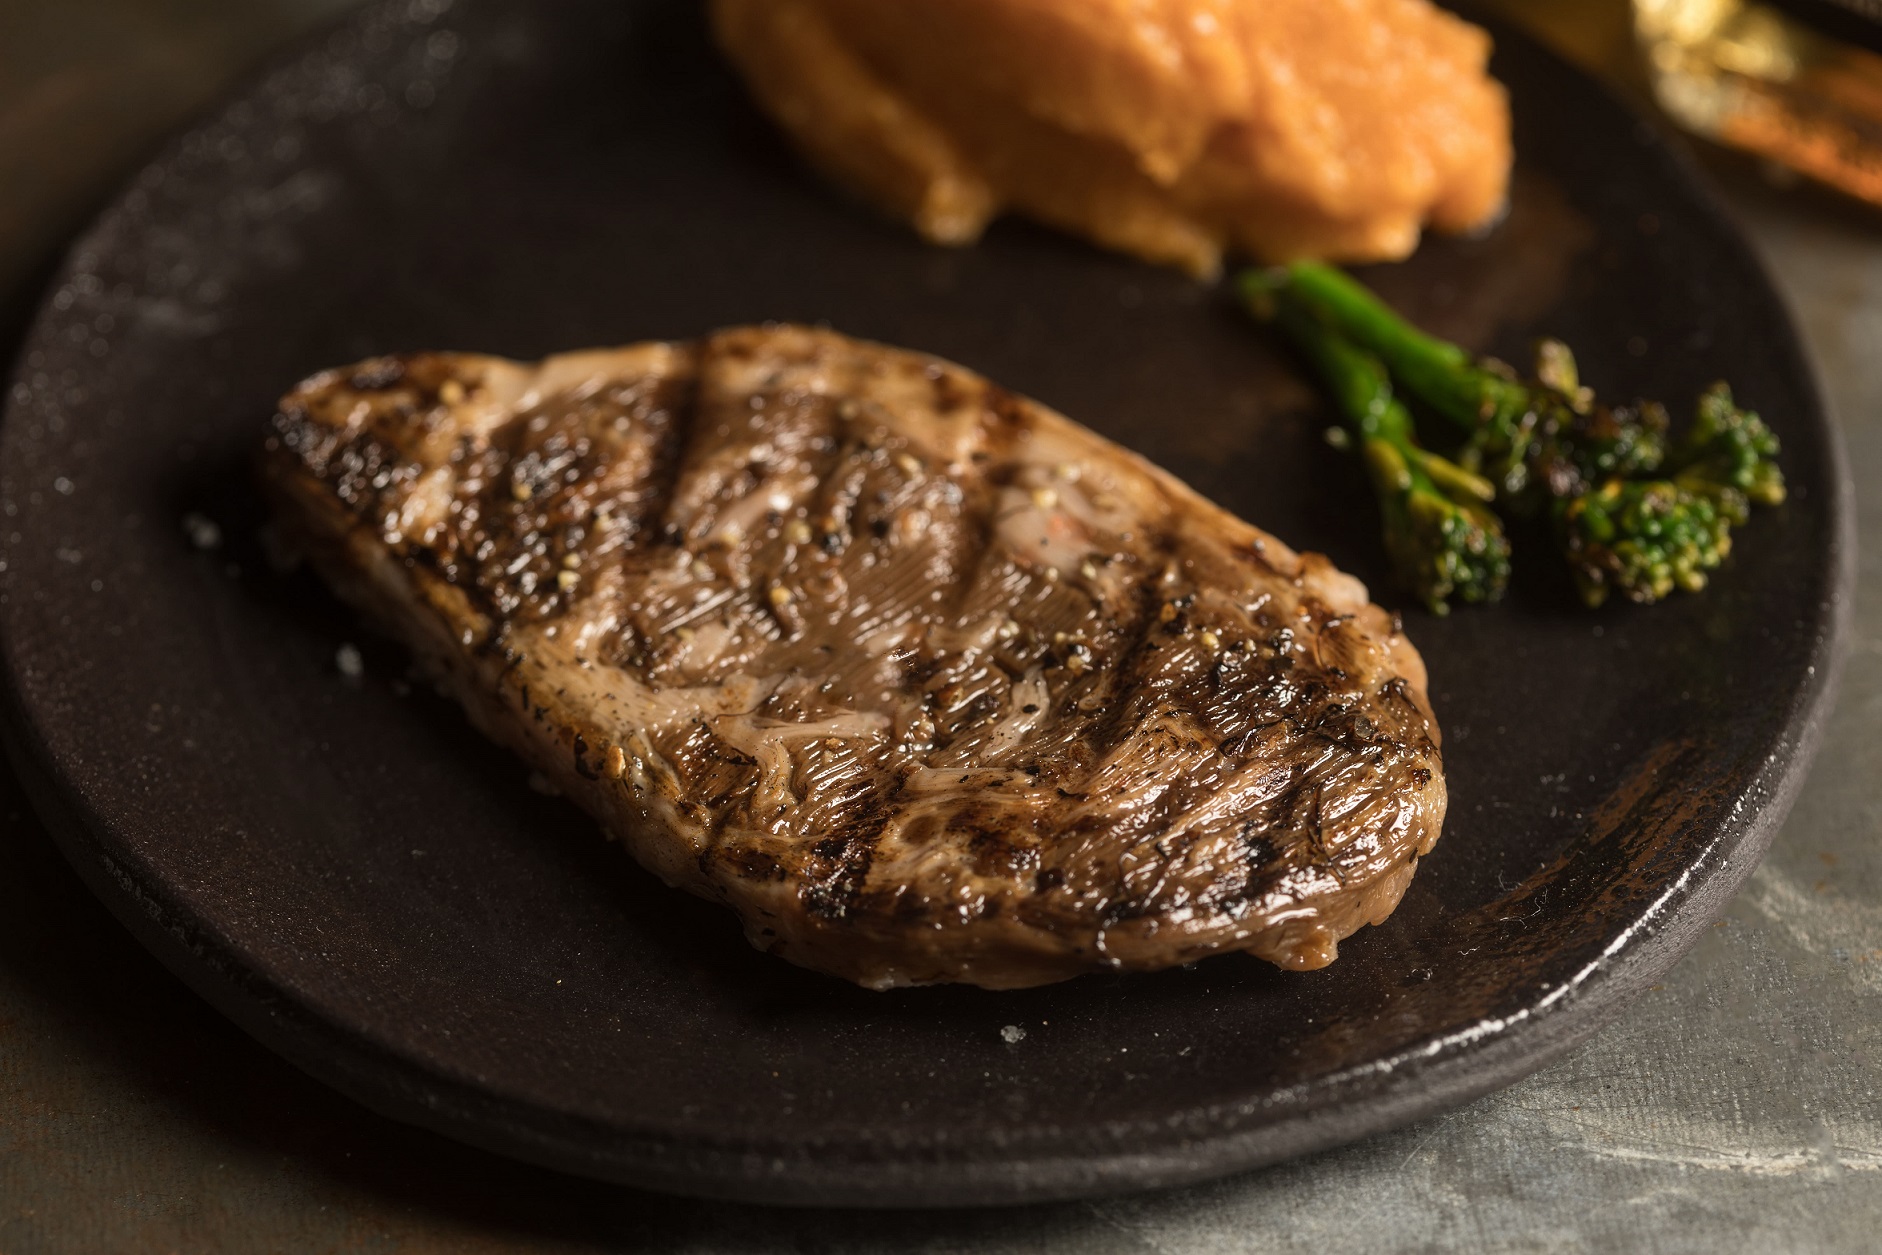 Aleph-Farms-and-The-Technion-Reveal-Worlds-First-Cultivated-Ribeye-Steak.jpg